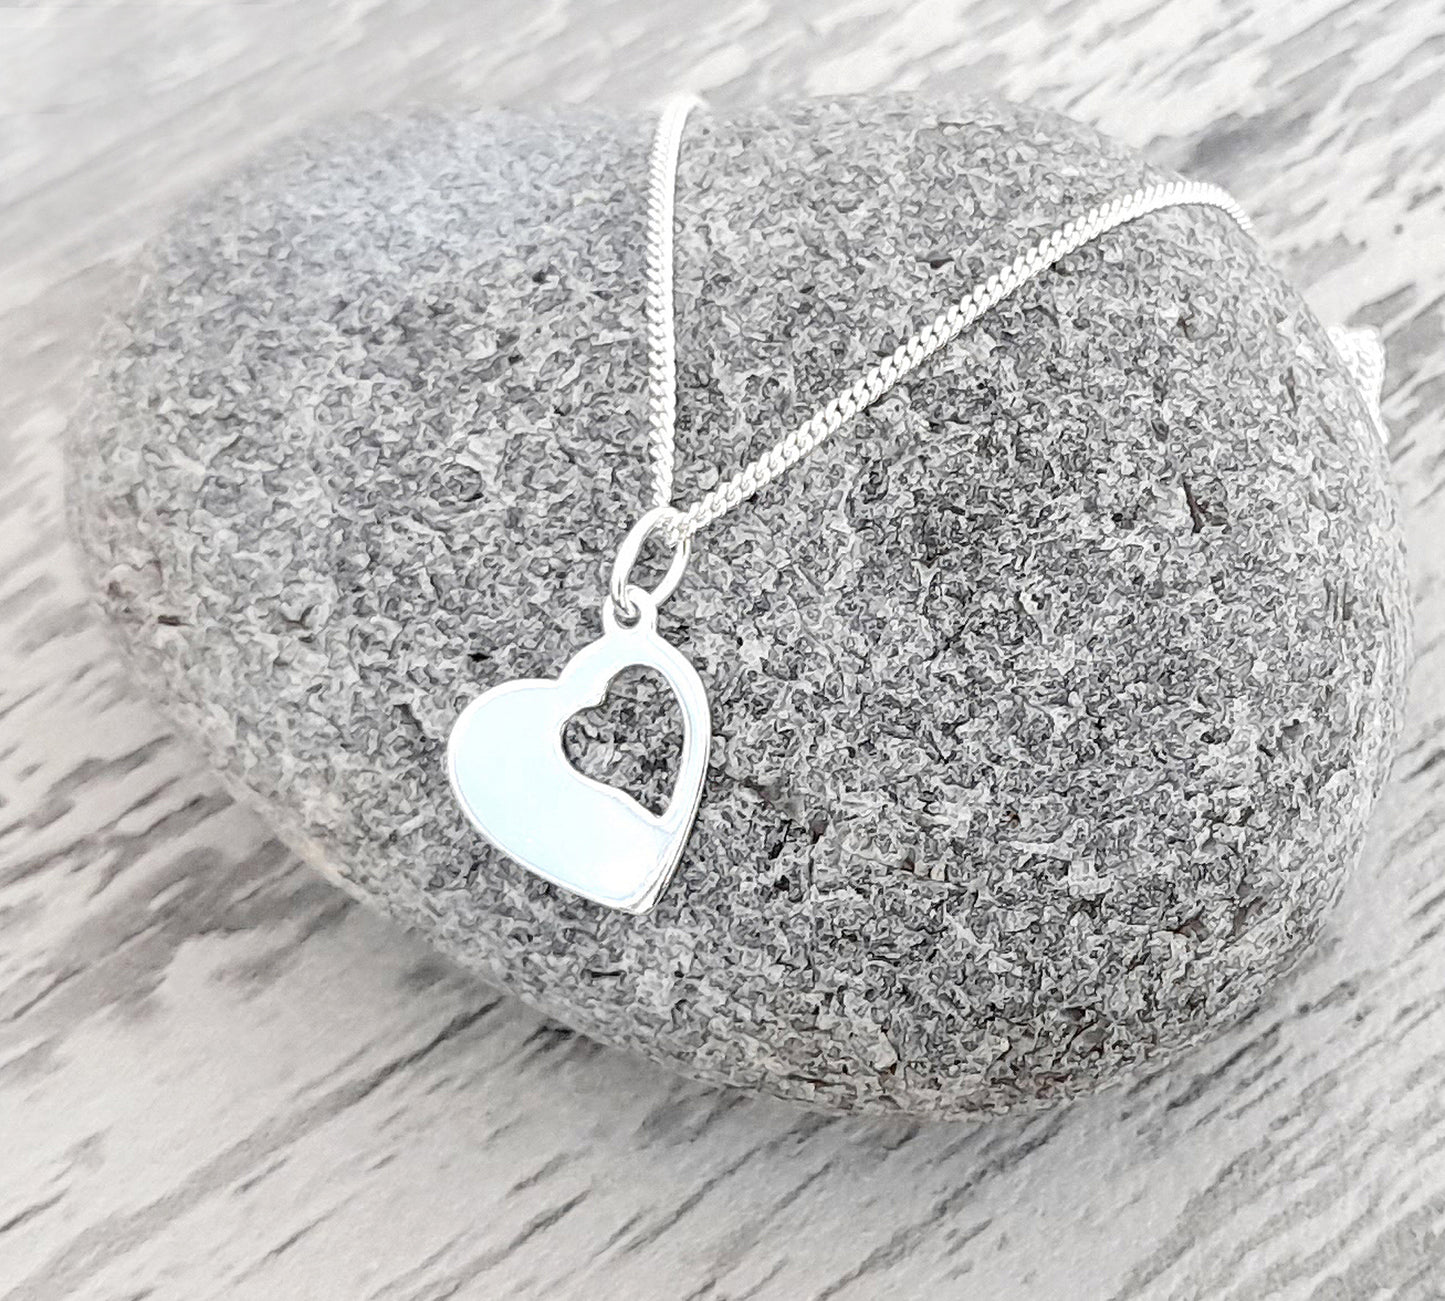 Mum Cut Out Heart Necklace in Sterling Silver 925, Personalised Gift